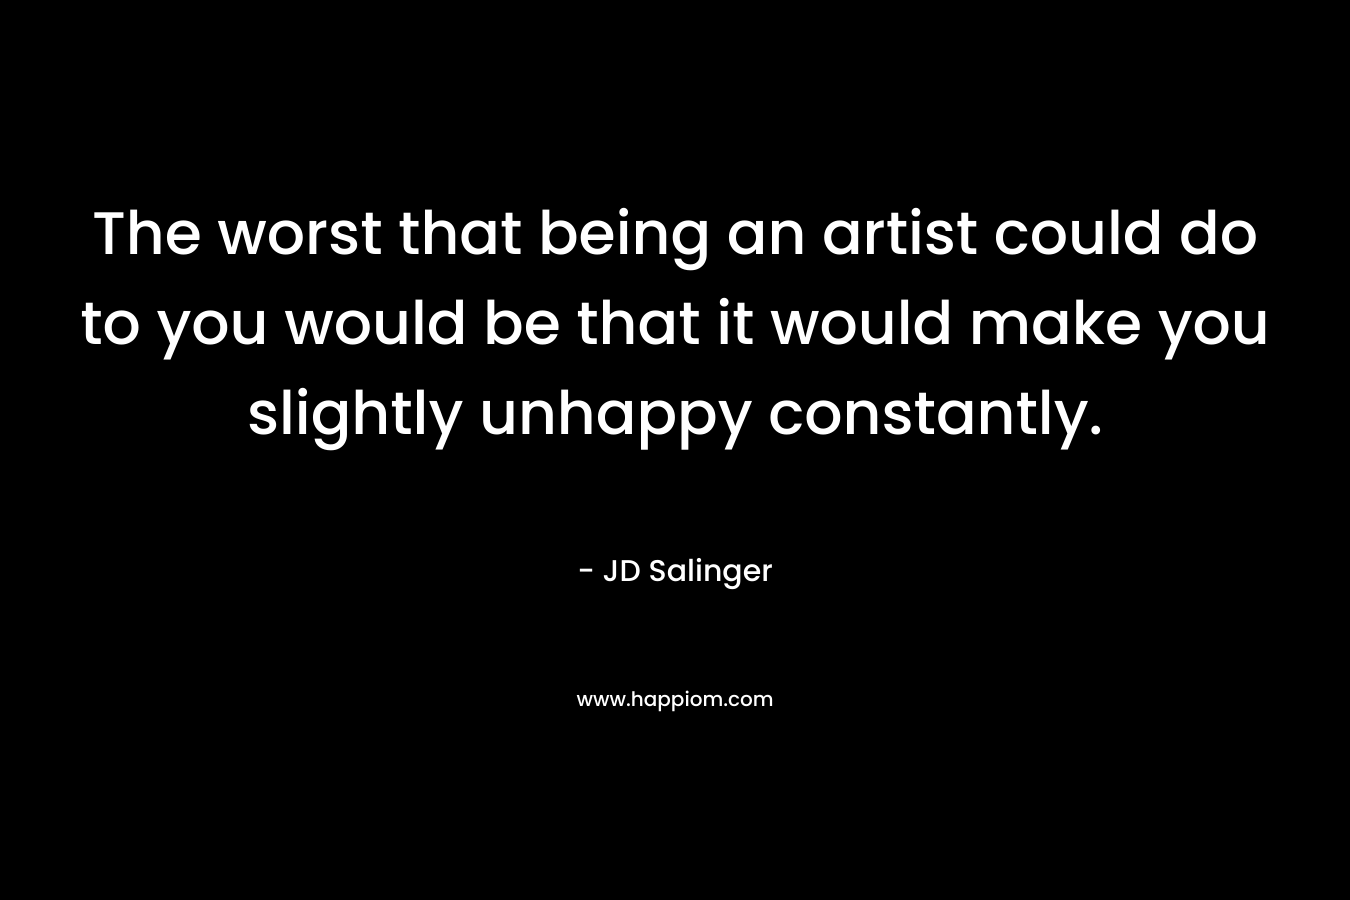 The worst that being an artist could do to you would be that it would make you slightly unhappy constantly. – JD Salinger